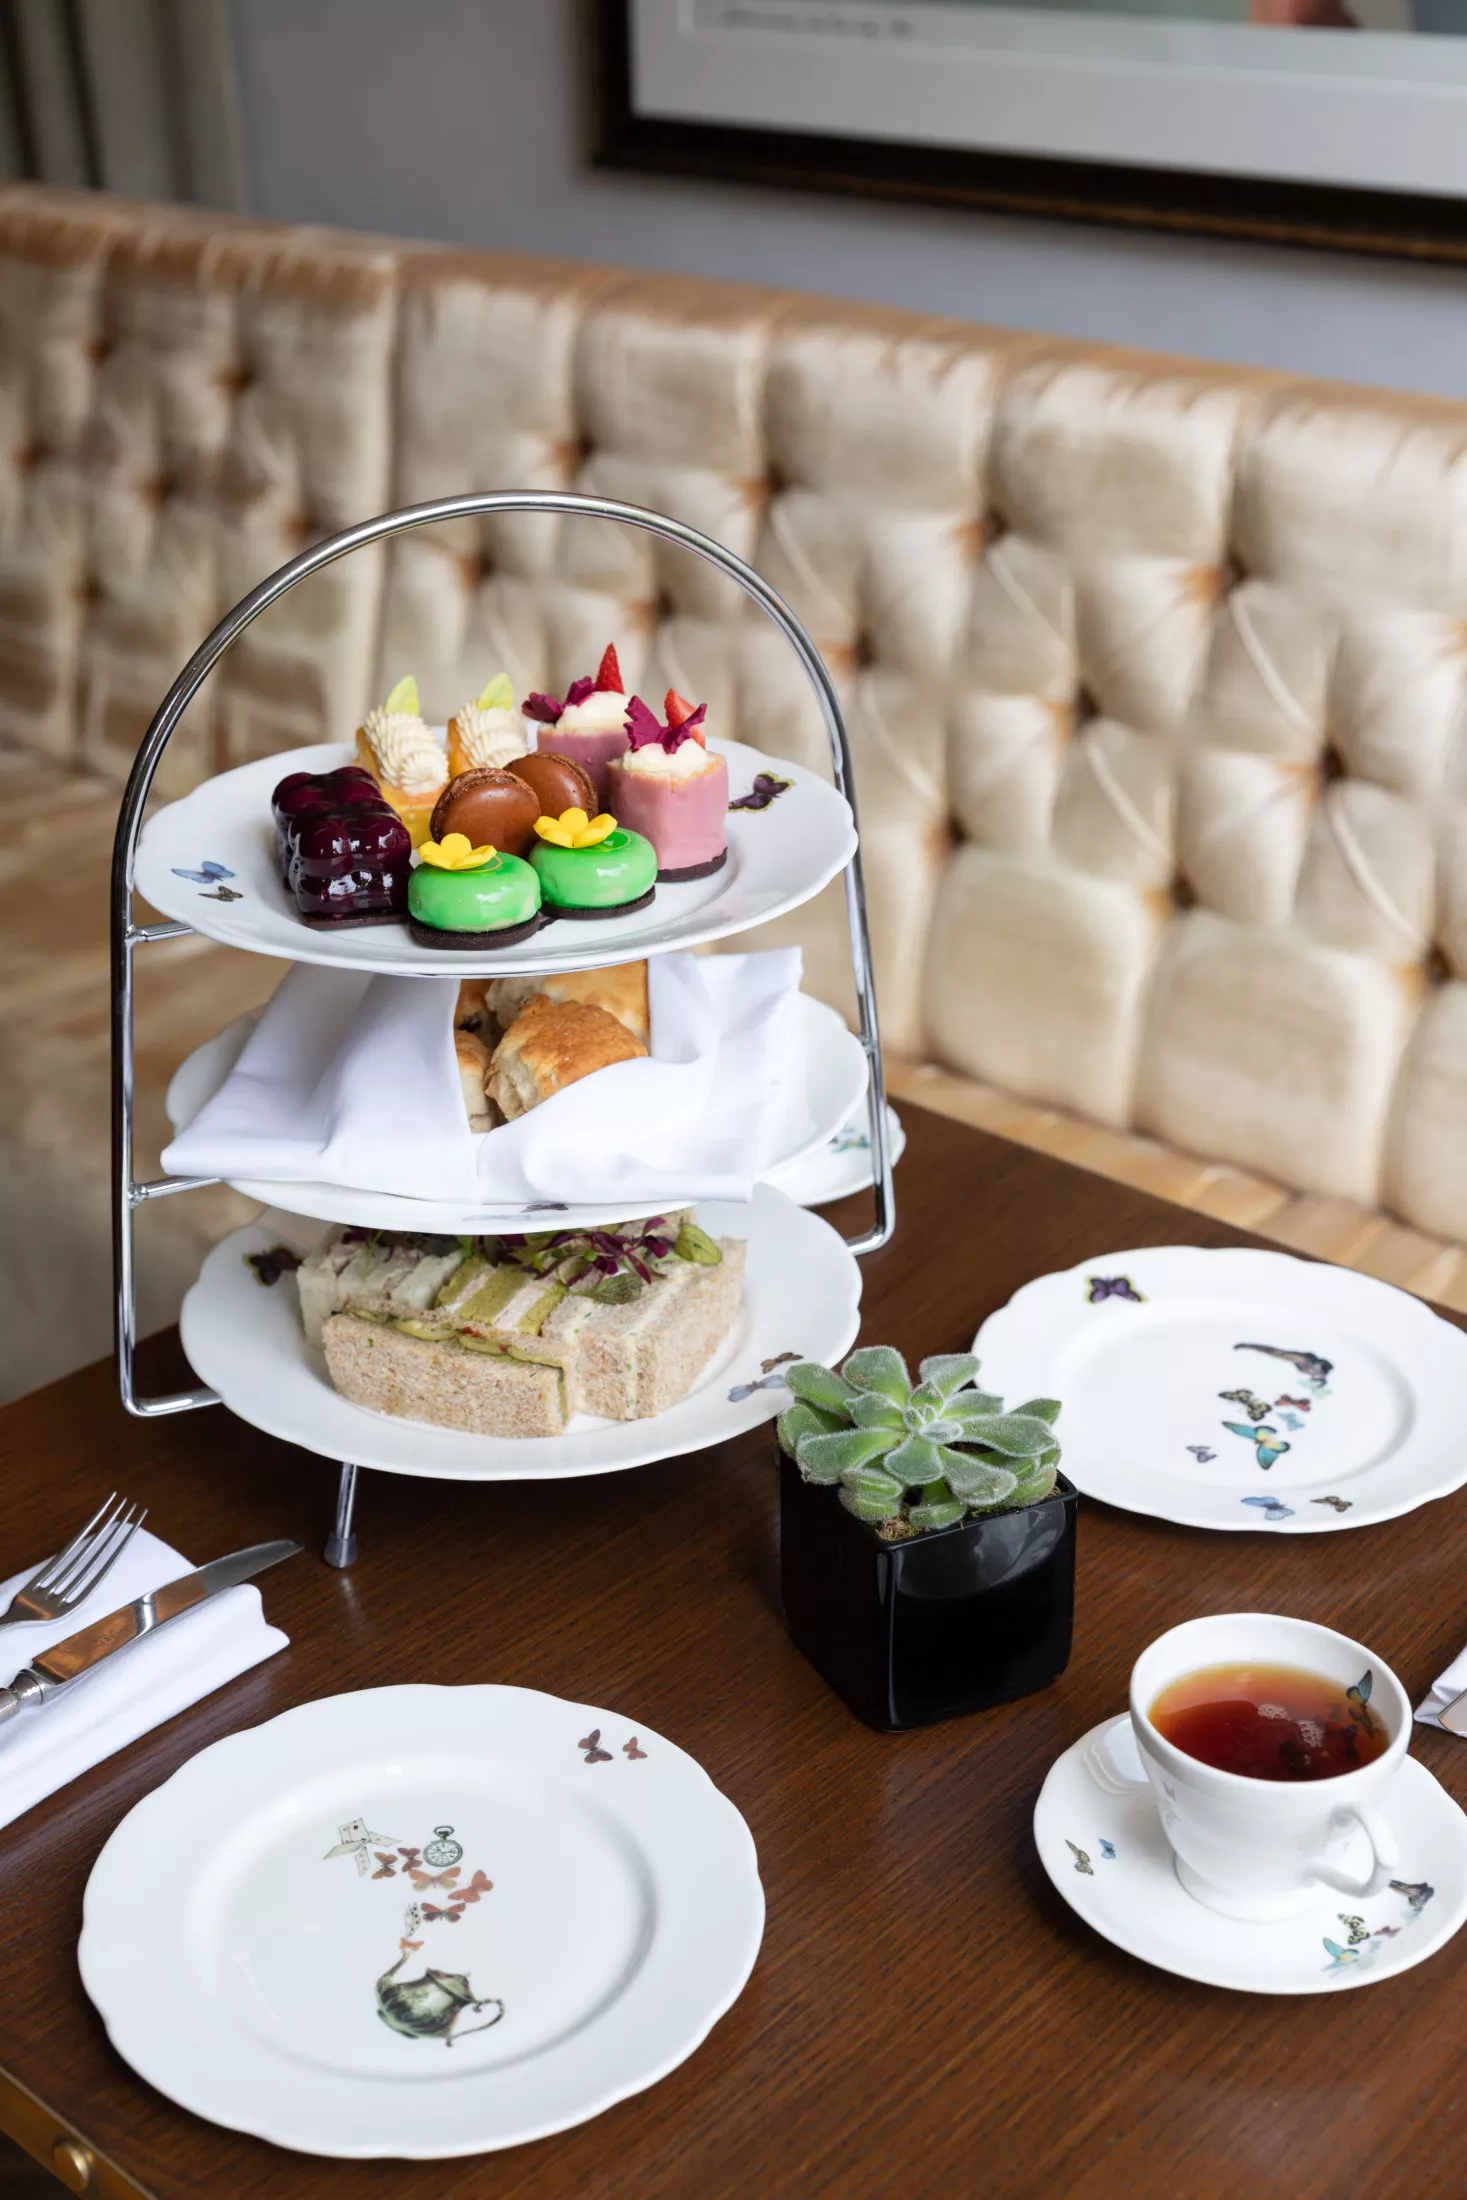 Guide to the best afternoon teas in Mayfair. Mayfair, known for its chic and sophisticated ambiance, is one of the most sought-after destinations for afternoon tea in London. With its picturesque streets lined with historic buildings and luxury boutiques, Mayfair offers a perfect setting for indulging in the quintessential British tradition of afternoon tea. Best Afternoon Tea in London #afternoontea #creamtea #Mayfair Things To Do In London | Things To Do In London